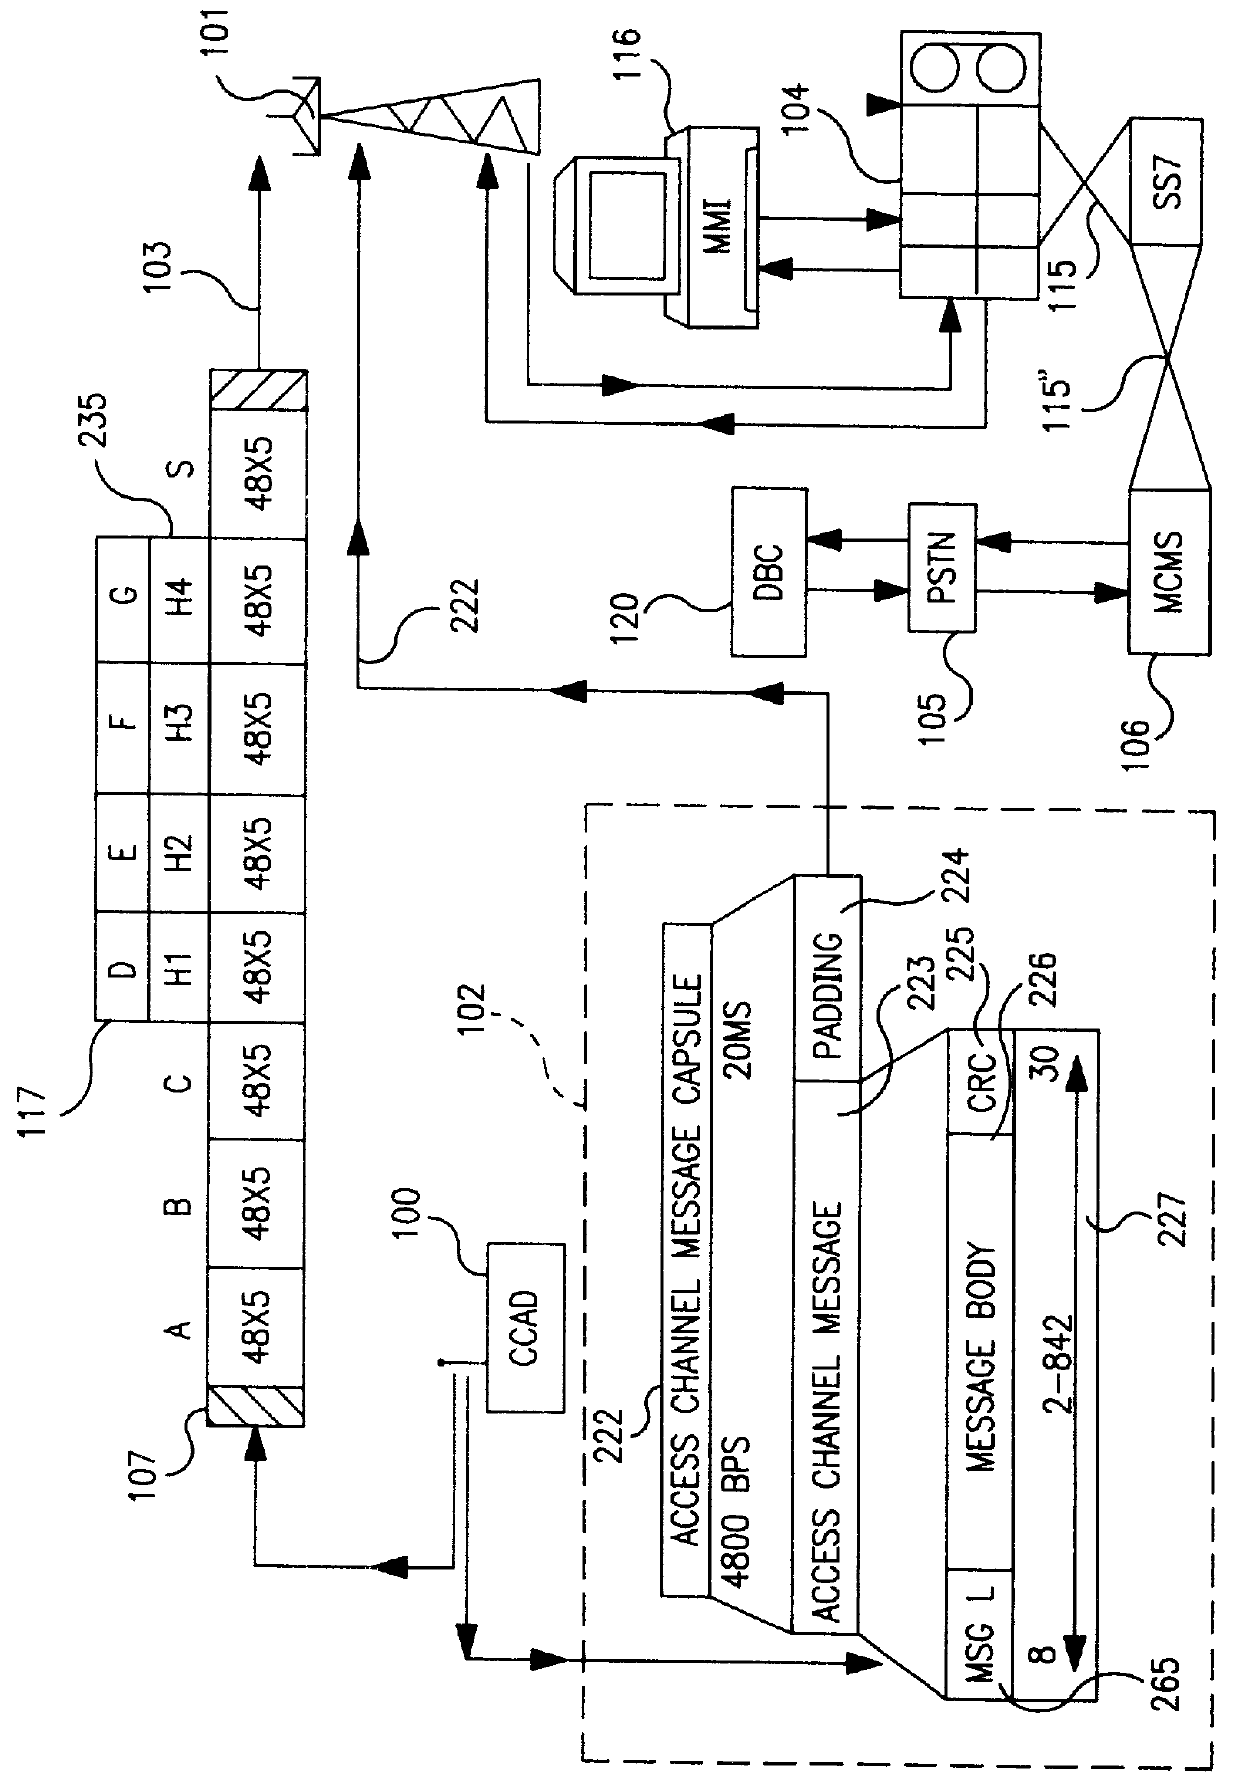 Method for transmitting voice or data in a wireless network depending on billing account status